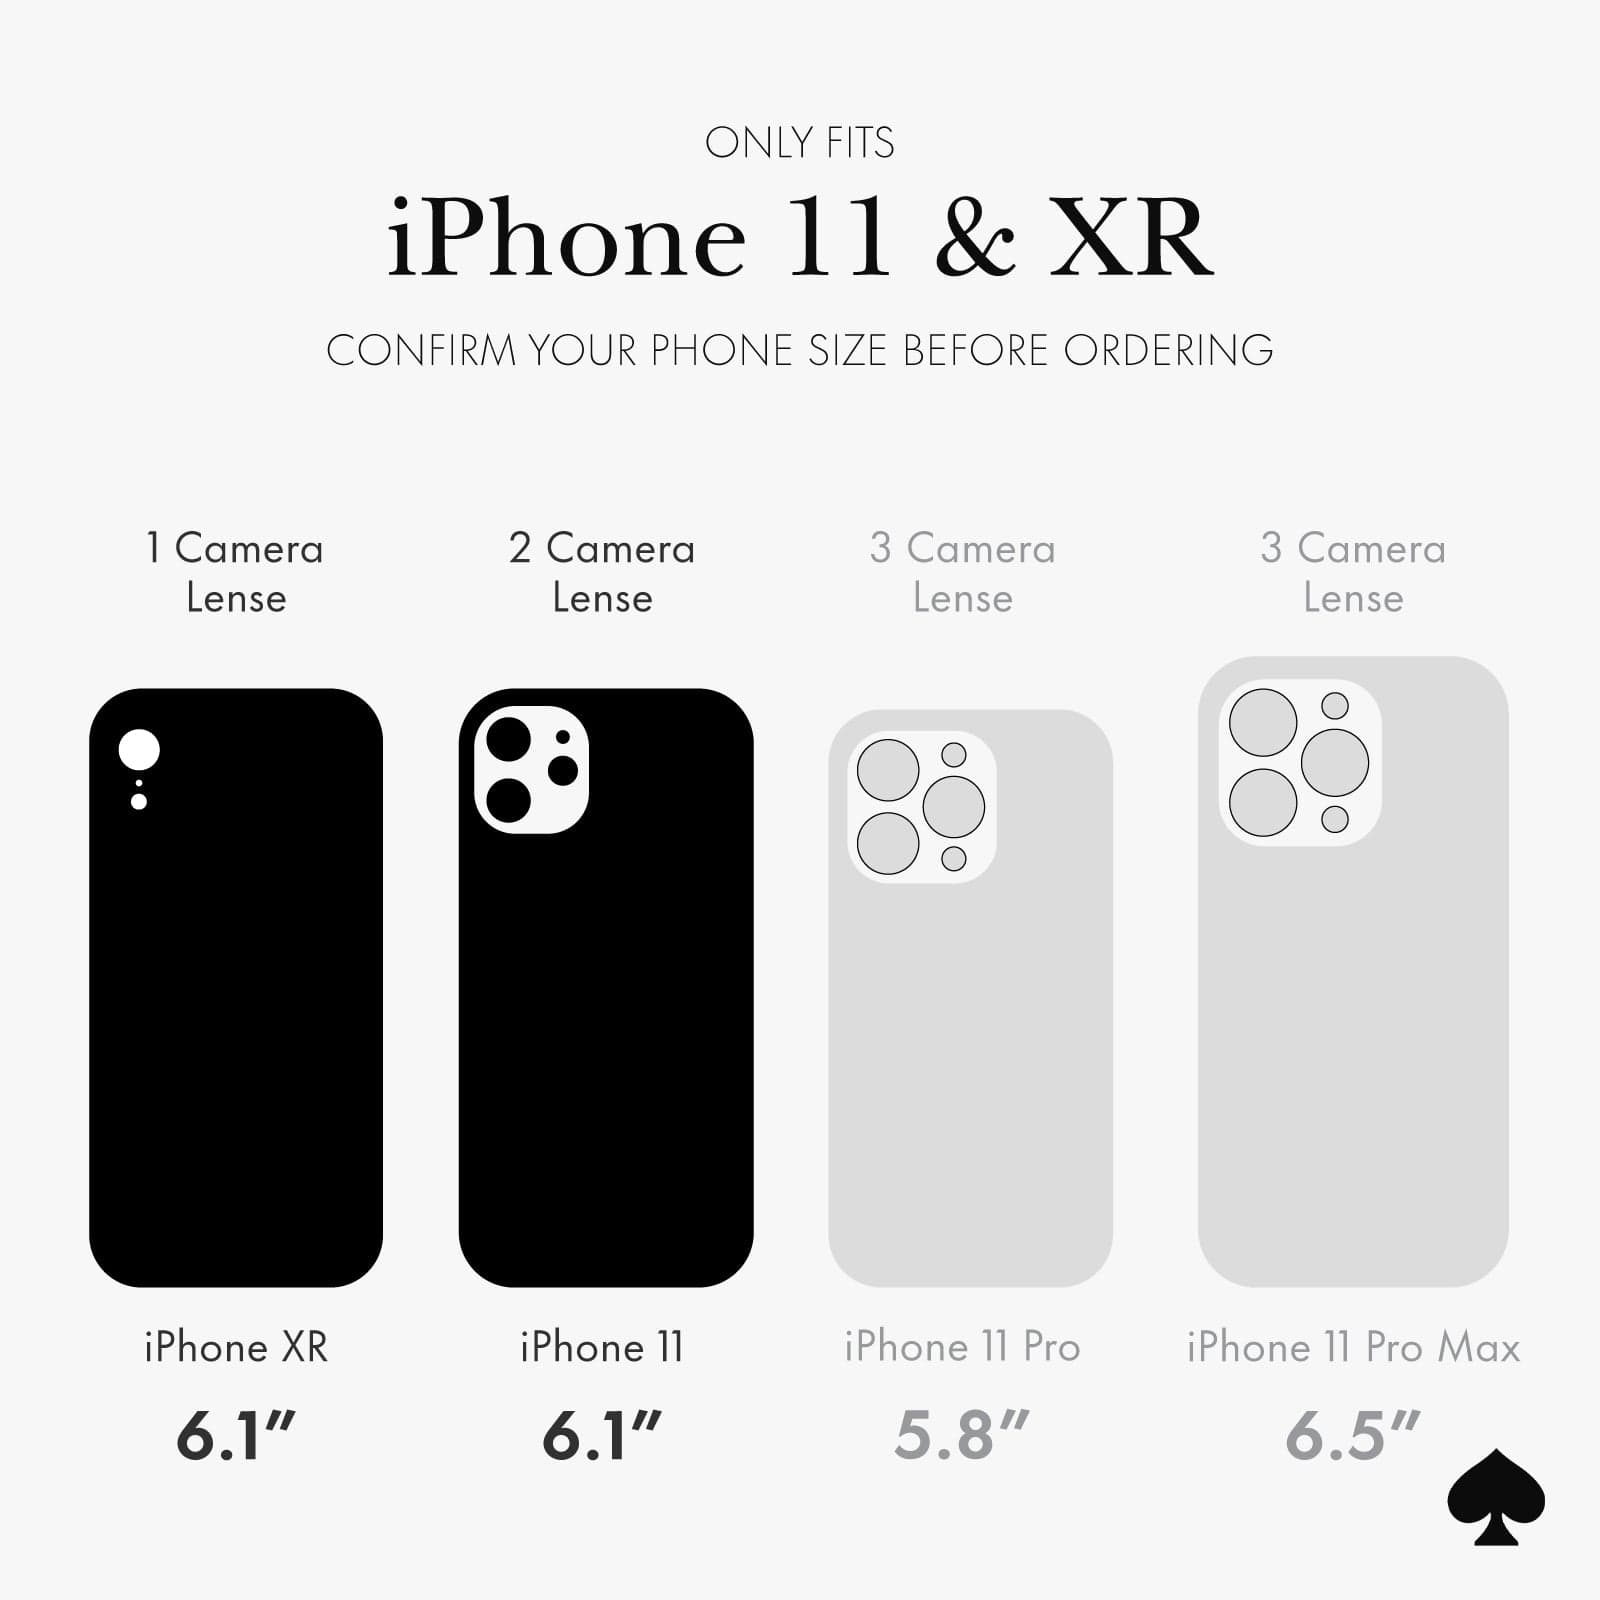 ONLY FITS IPHONE 11 AND XR. CONFIRM YOUR PHONE SIZE BEFORE ORDERING